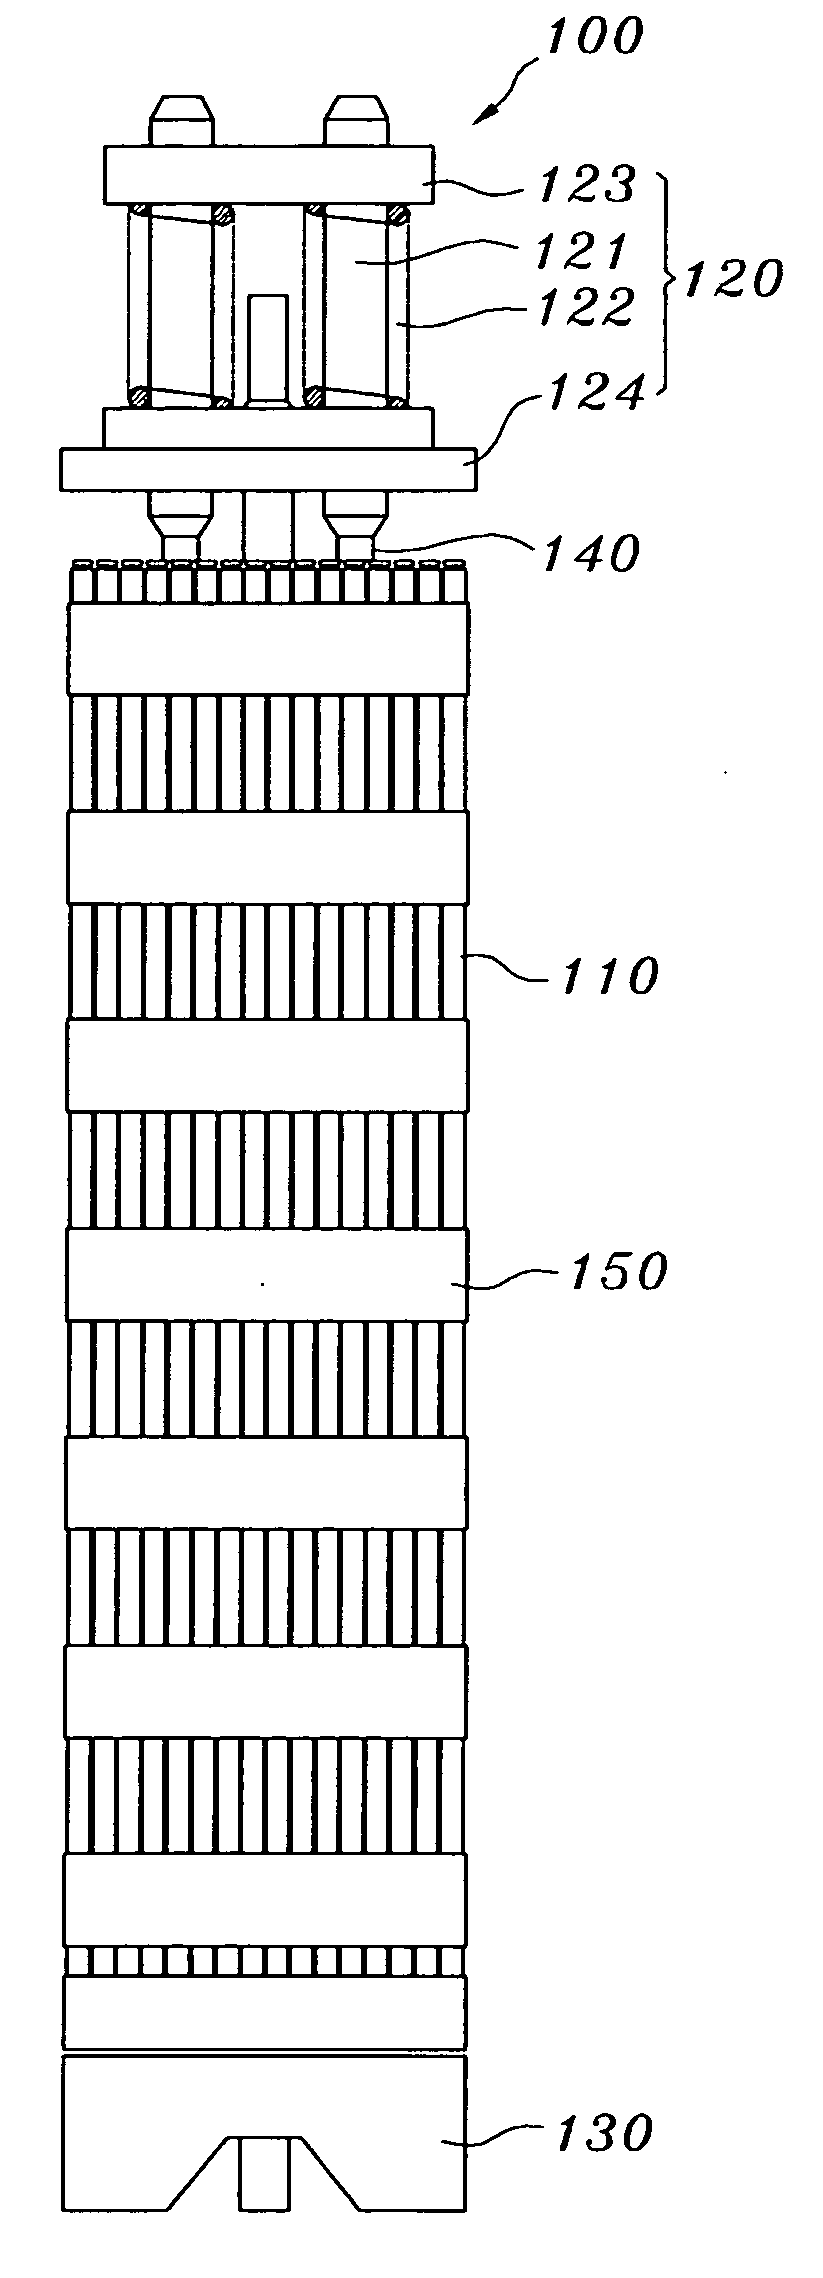 Guide thimble of dual tube type structure nuclear fuel assembly